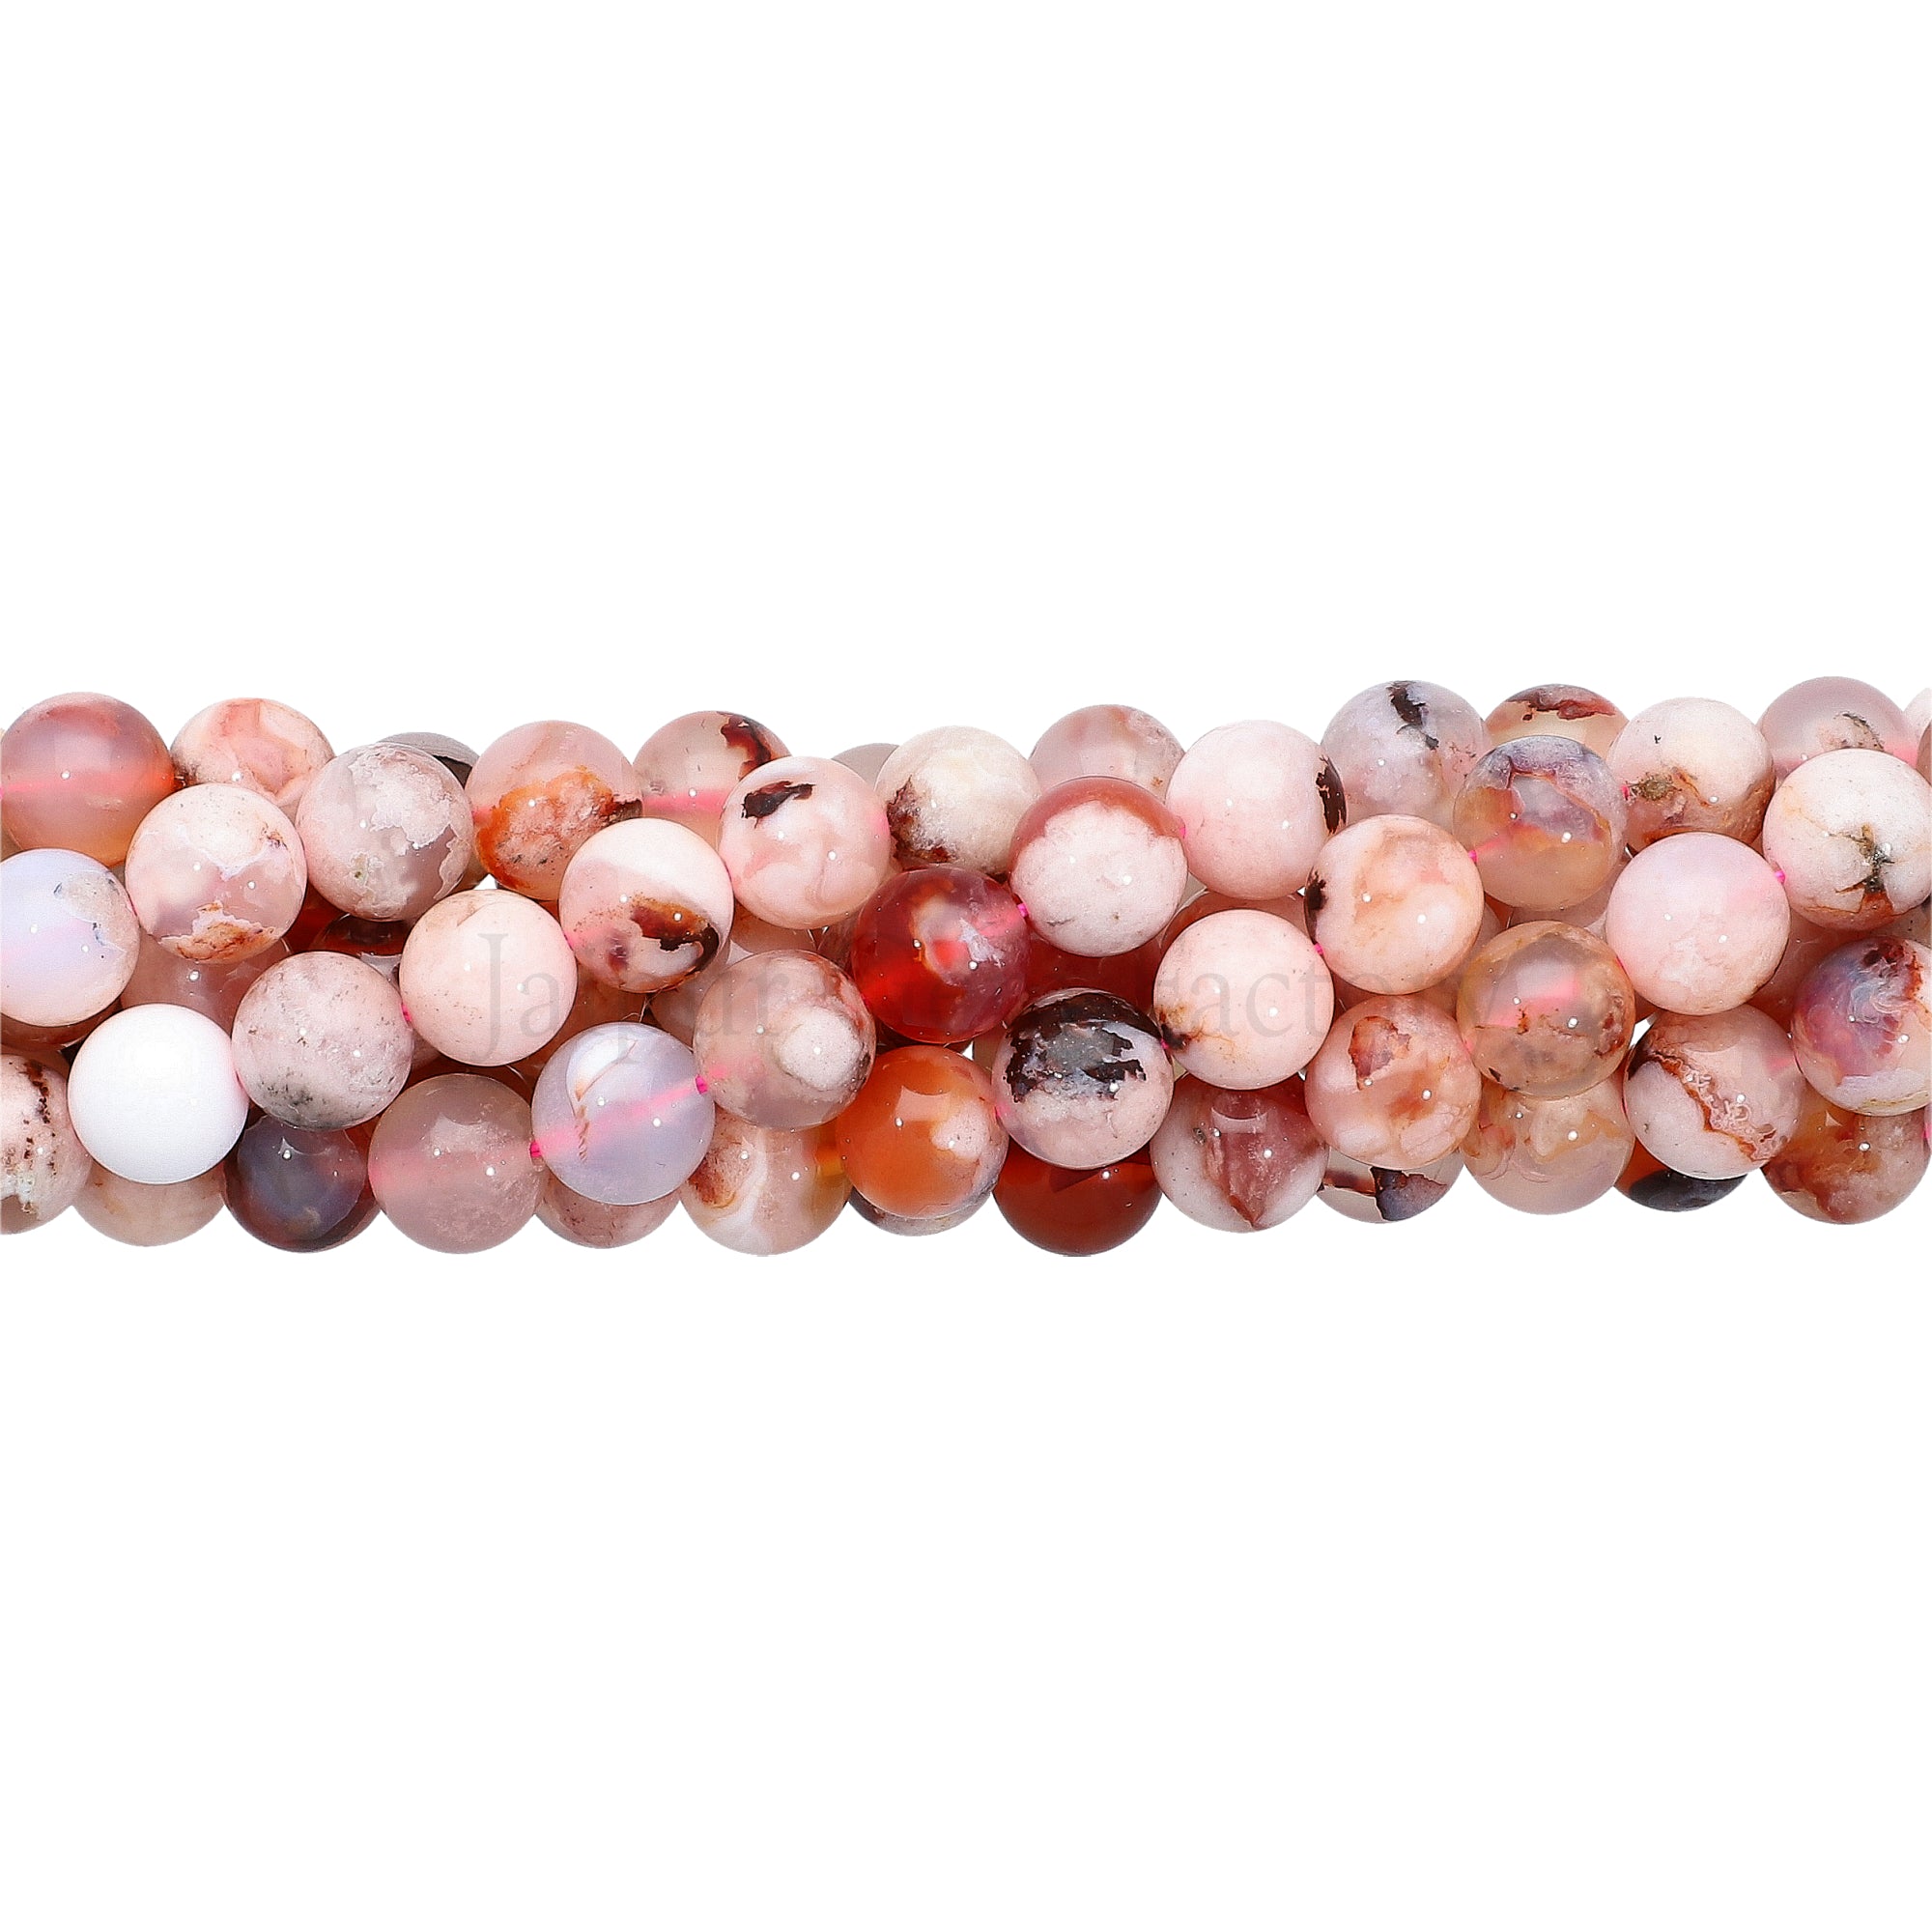 8 MM Cherry Blossom Agate Smooth Round Beads 14 Inches Strand